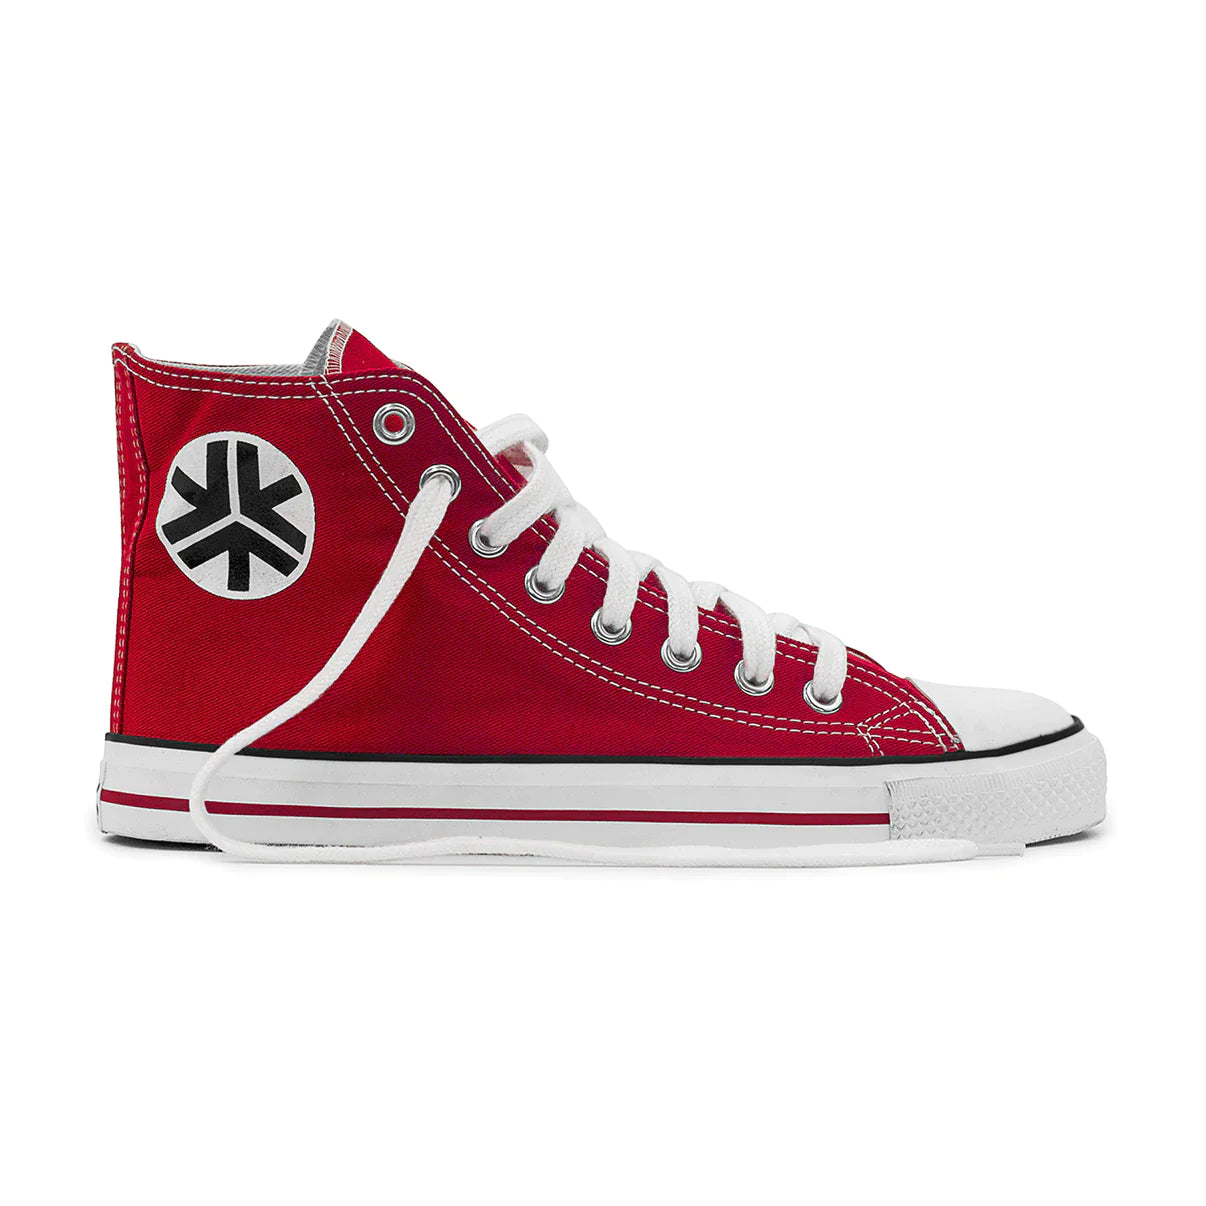 Etiko Fairtrade Certified High Top Style Red and White Kids Sneakers, Eco-Friendly